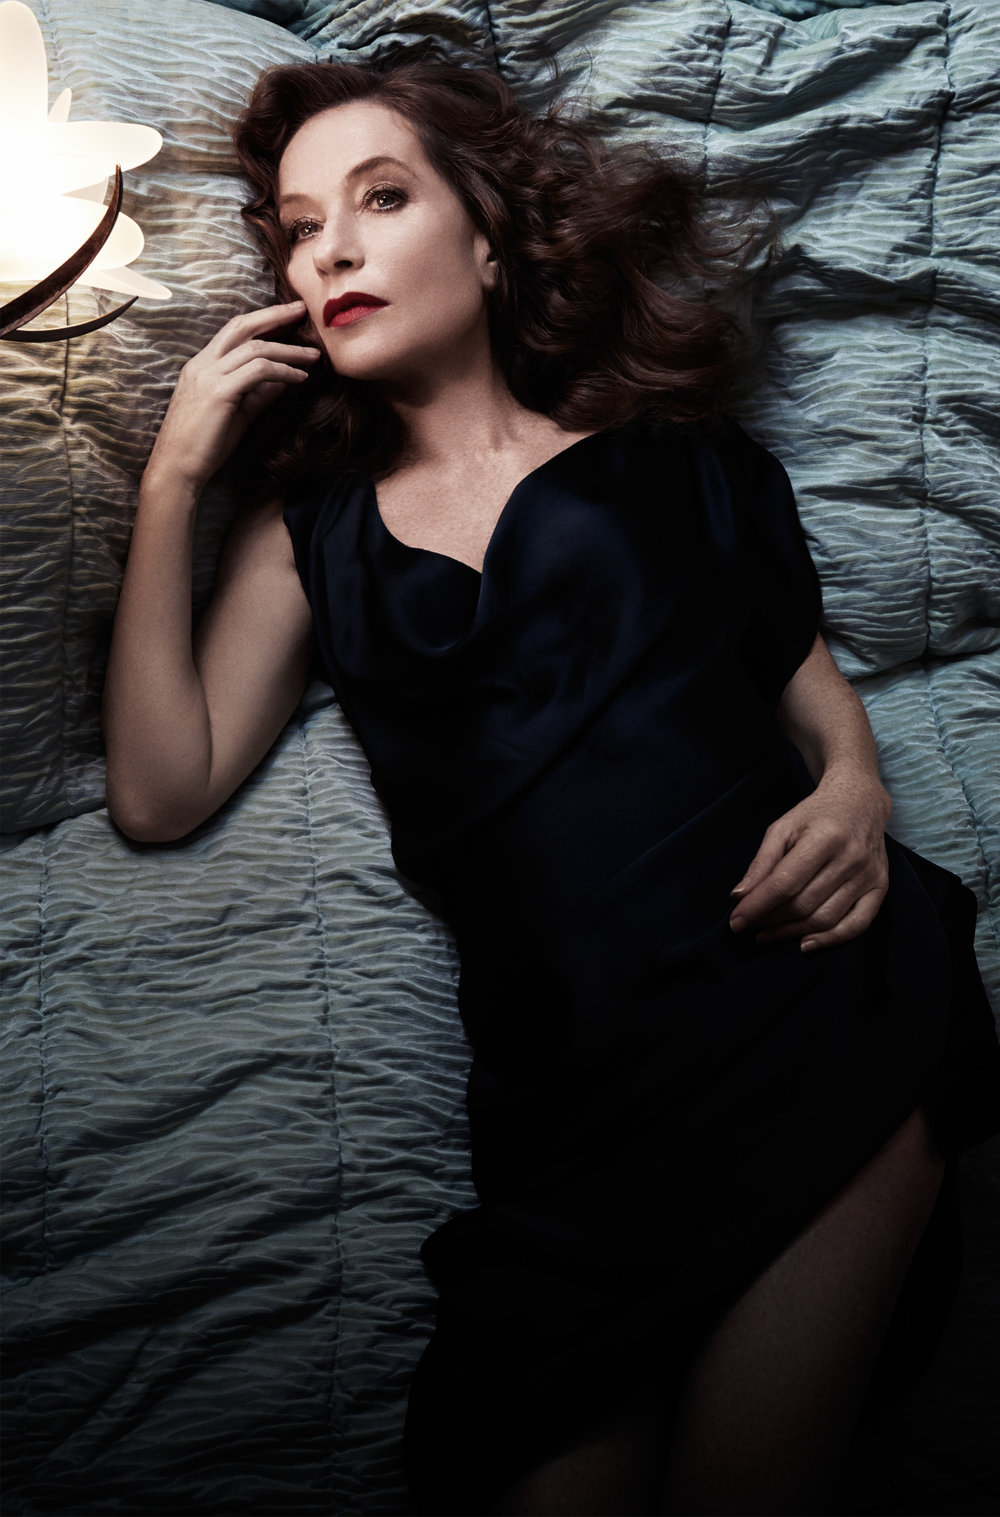 The 20 Sexiest Redhead Actresses in the World - Isabelle Huppert